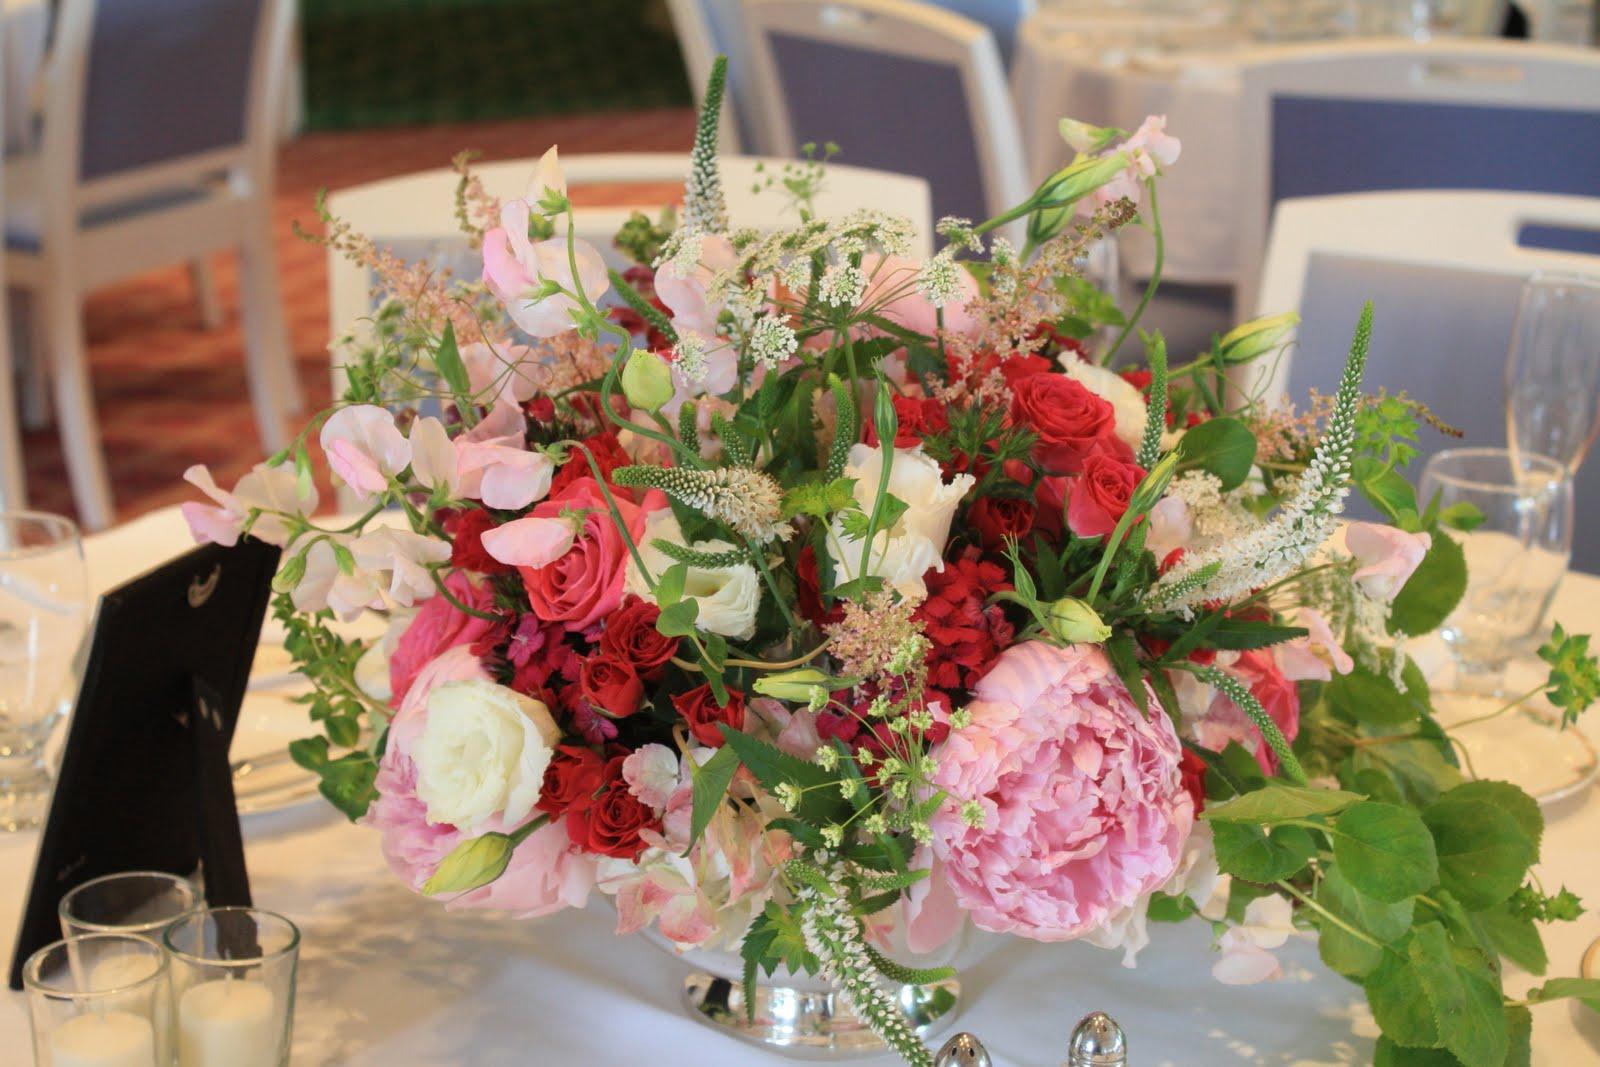 style of centerpieces.